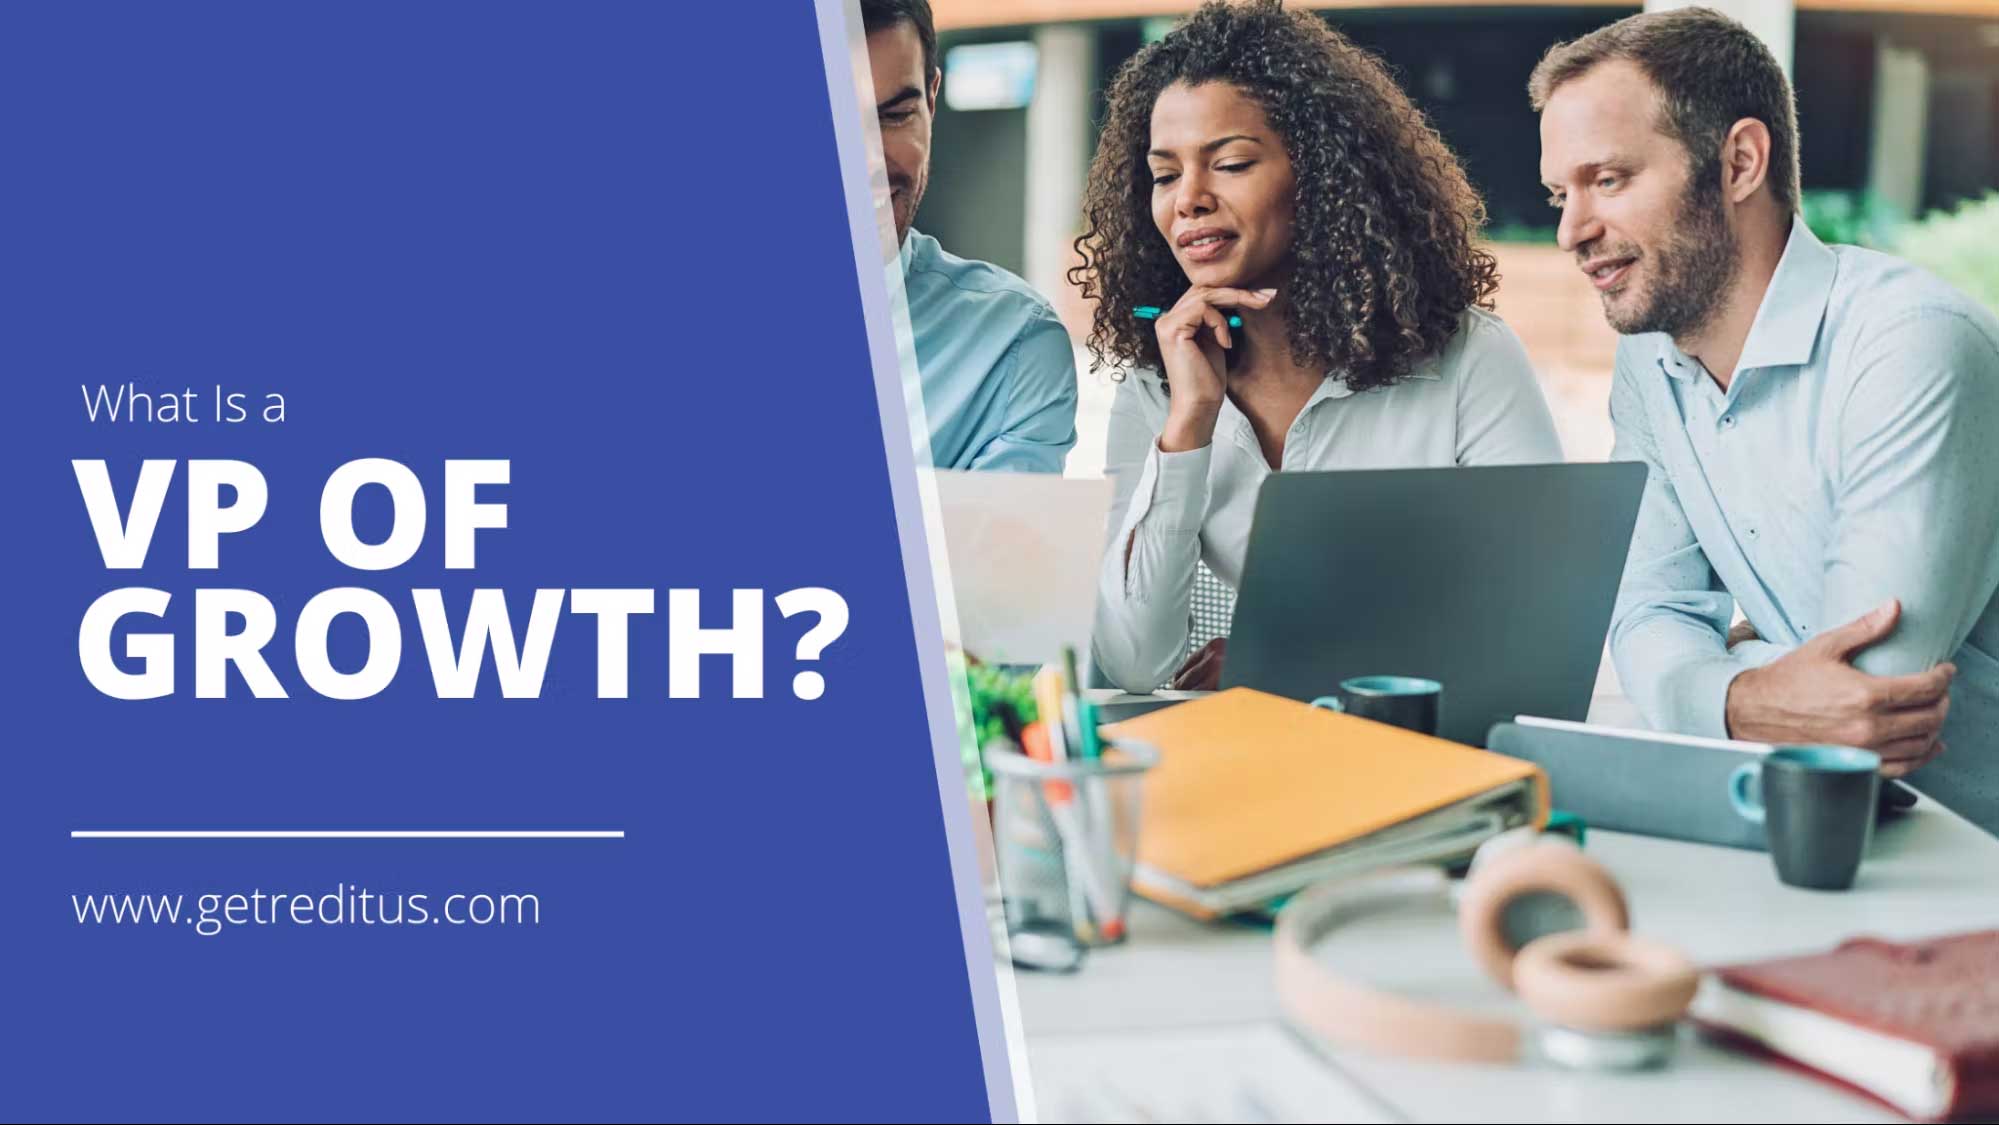 What Is a VP of Growth? Description and Responsibilities